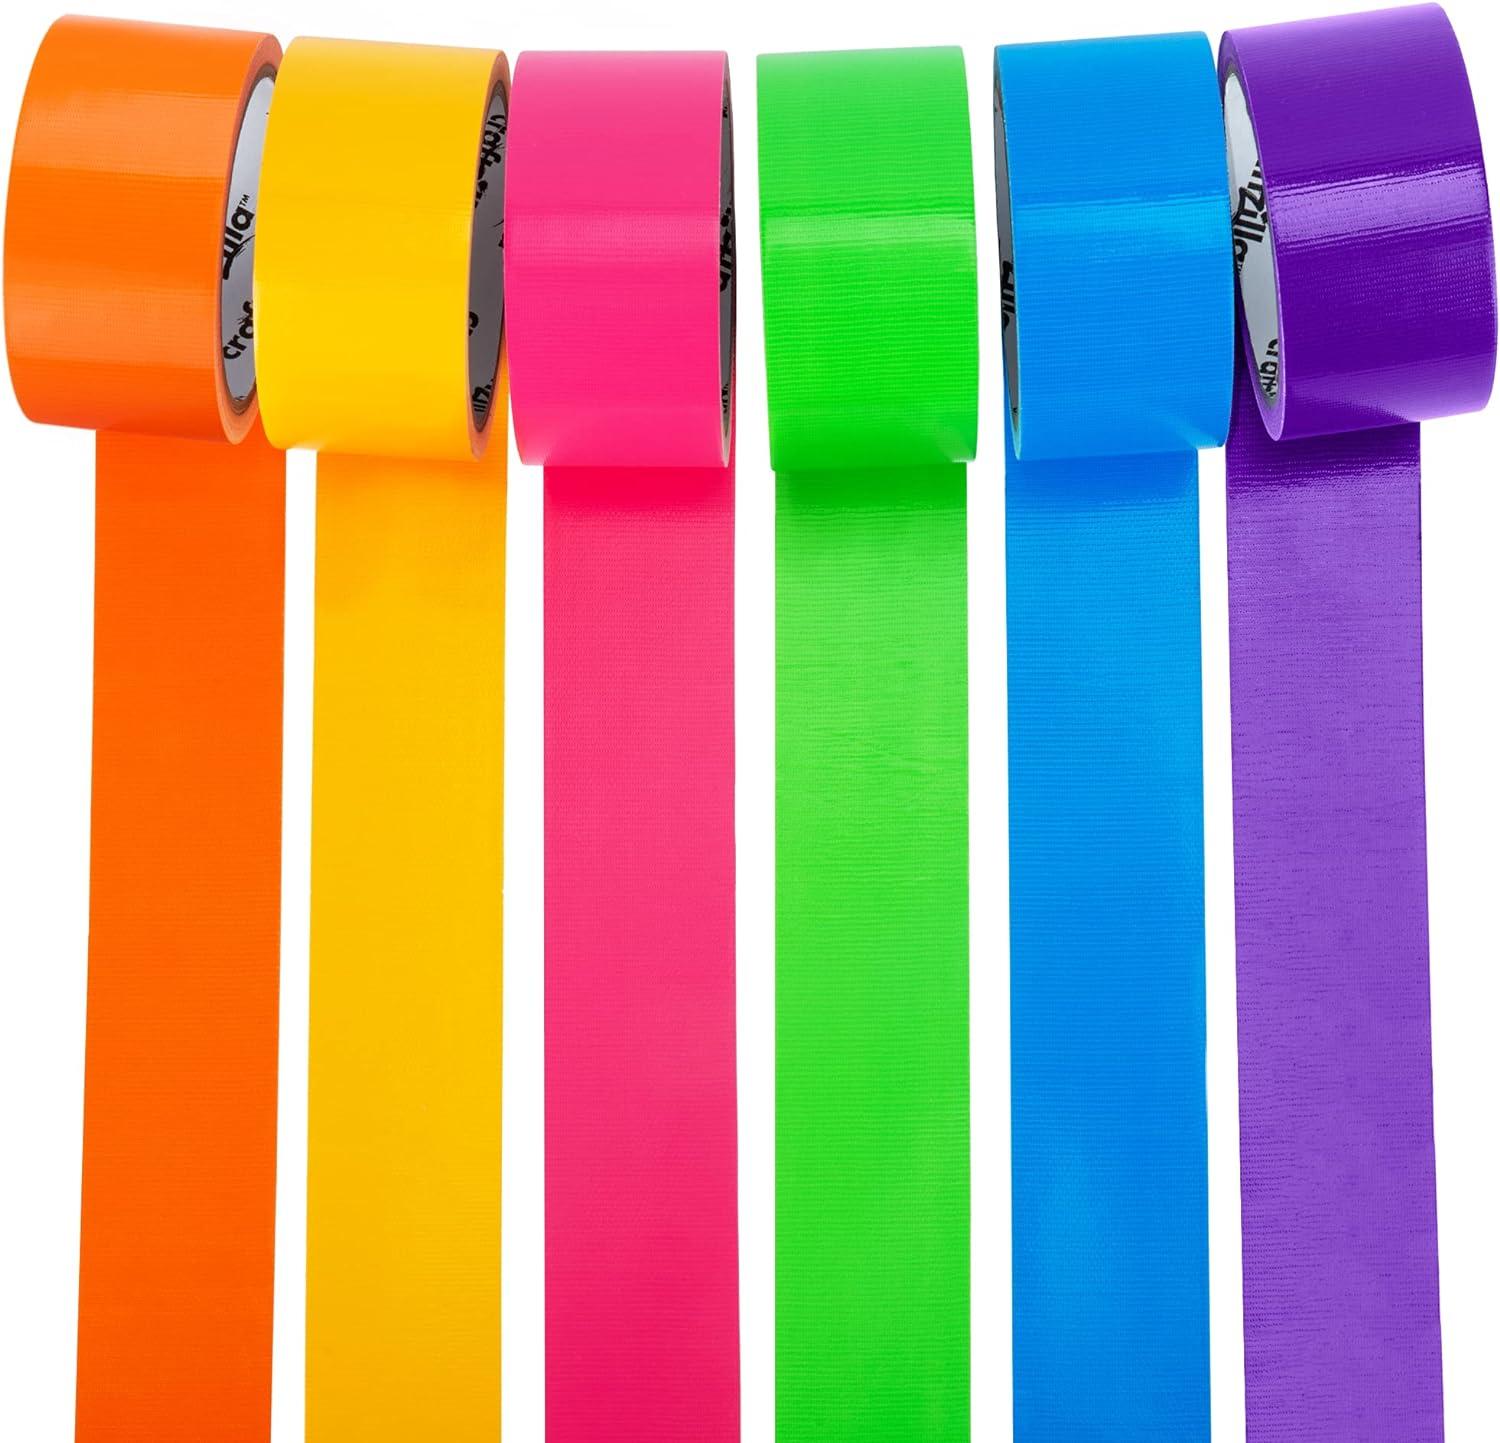  FRCOLOR 3 Rolls Colored Duct Tape Plastic Bag Tape